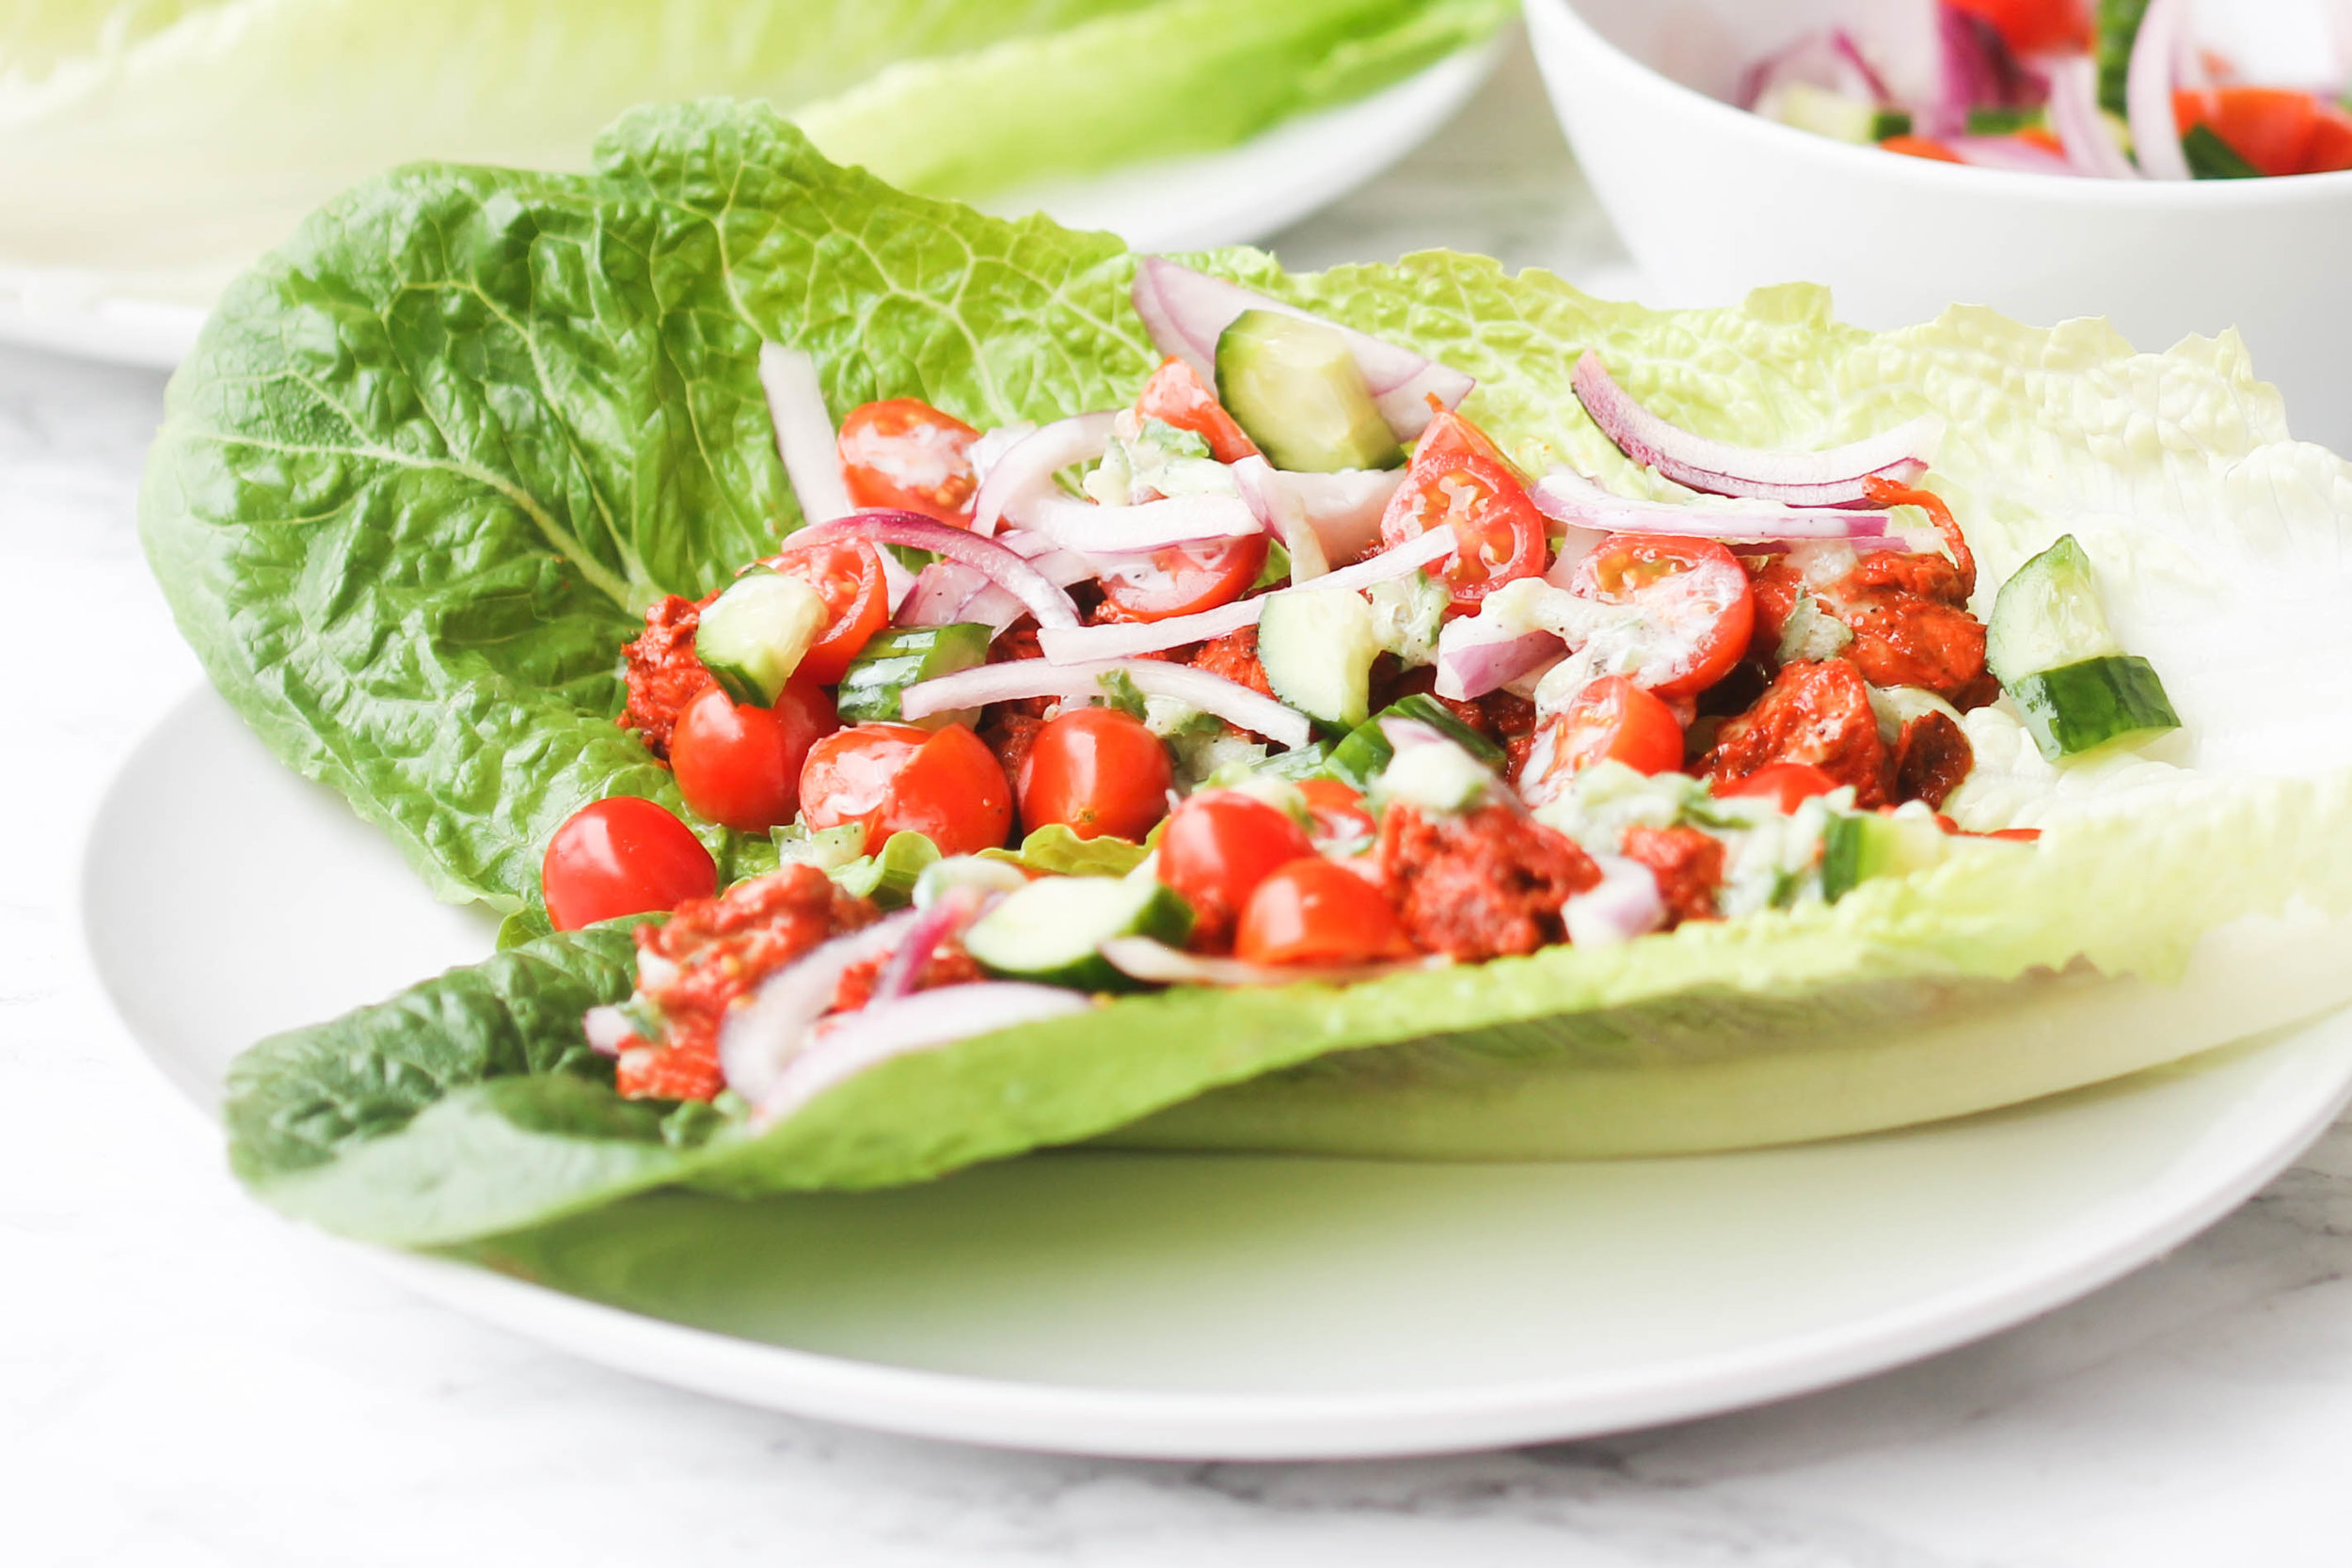 Chicken Tikka Lettuce Wrap is a family-friendly option for weeknight. It is super quick, delicious, and can be made ahead of time. Naturally gluten-free.